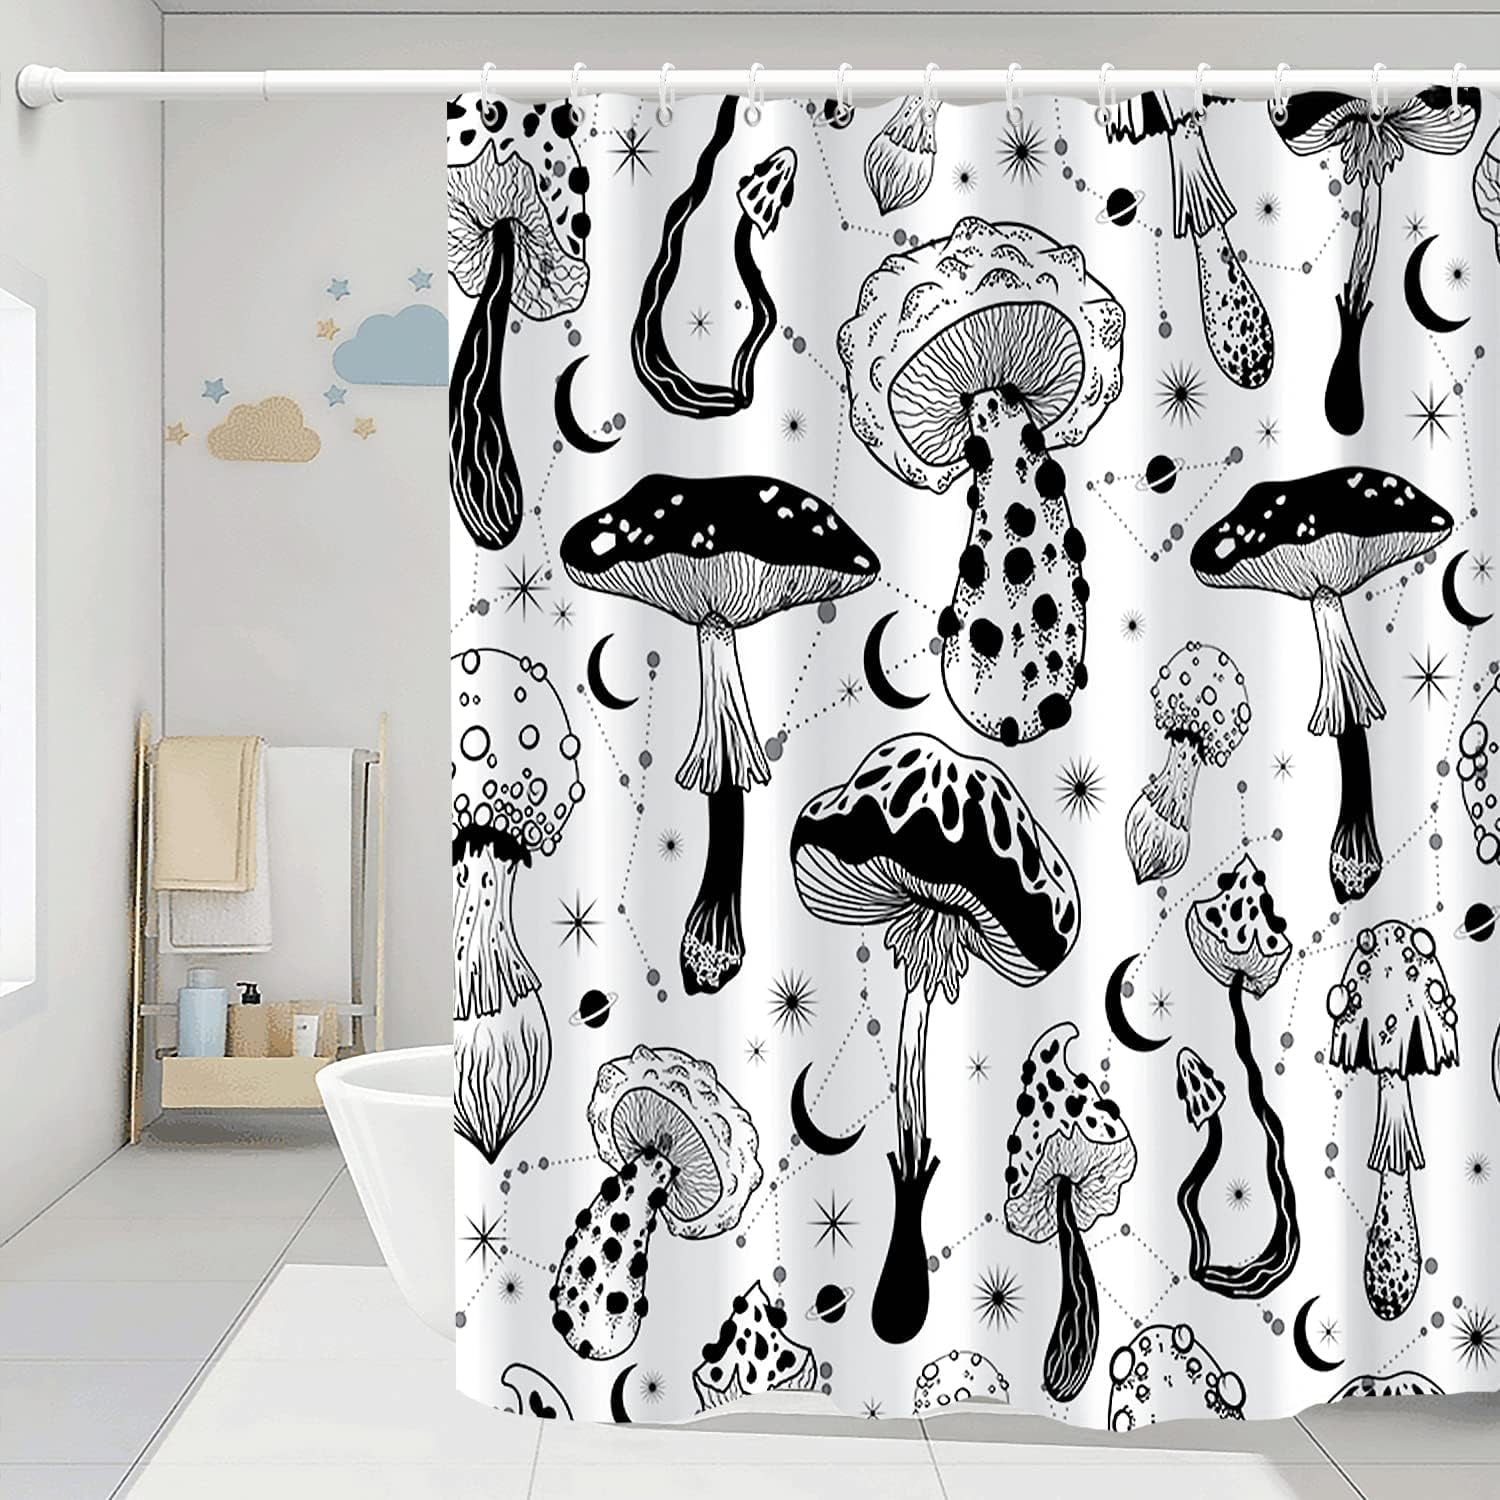 JOOCAR Mushrooms Bathroom Shower Curtain Psychedelic Retro 70s 60s Hippie  Black and White Shower Curtain Washable Durable Fabric Home Decorative  Shower Curtain with Hooks, 72x72 Inch 